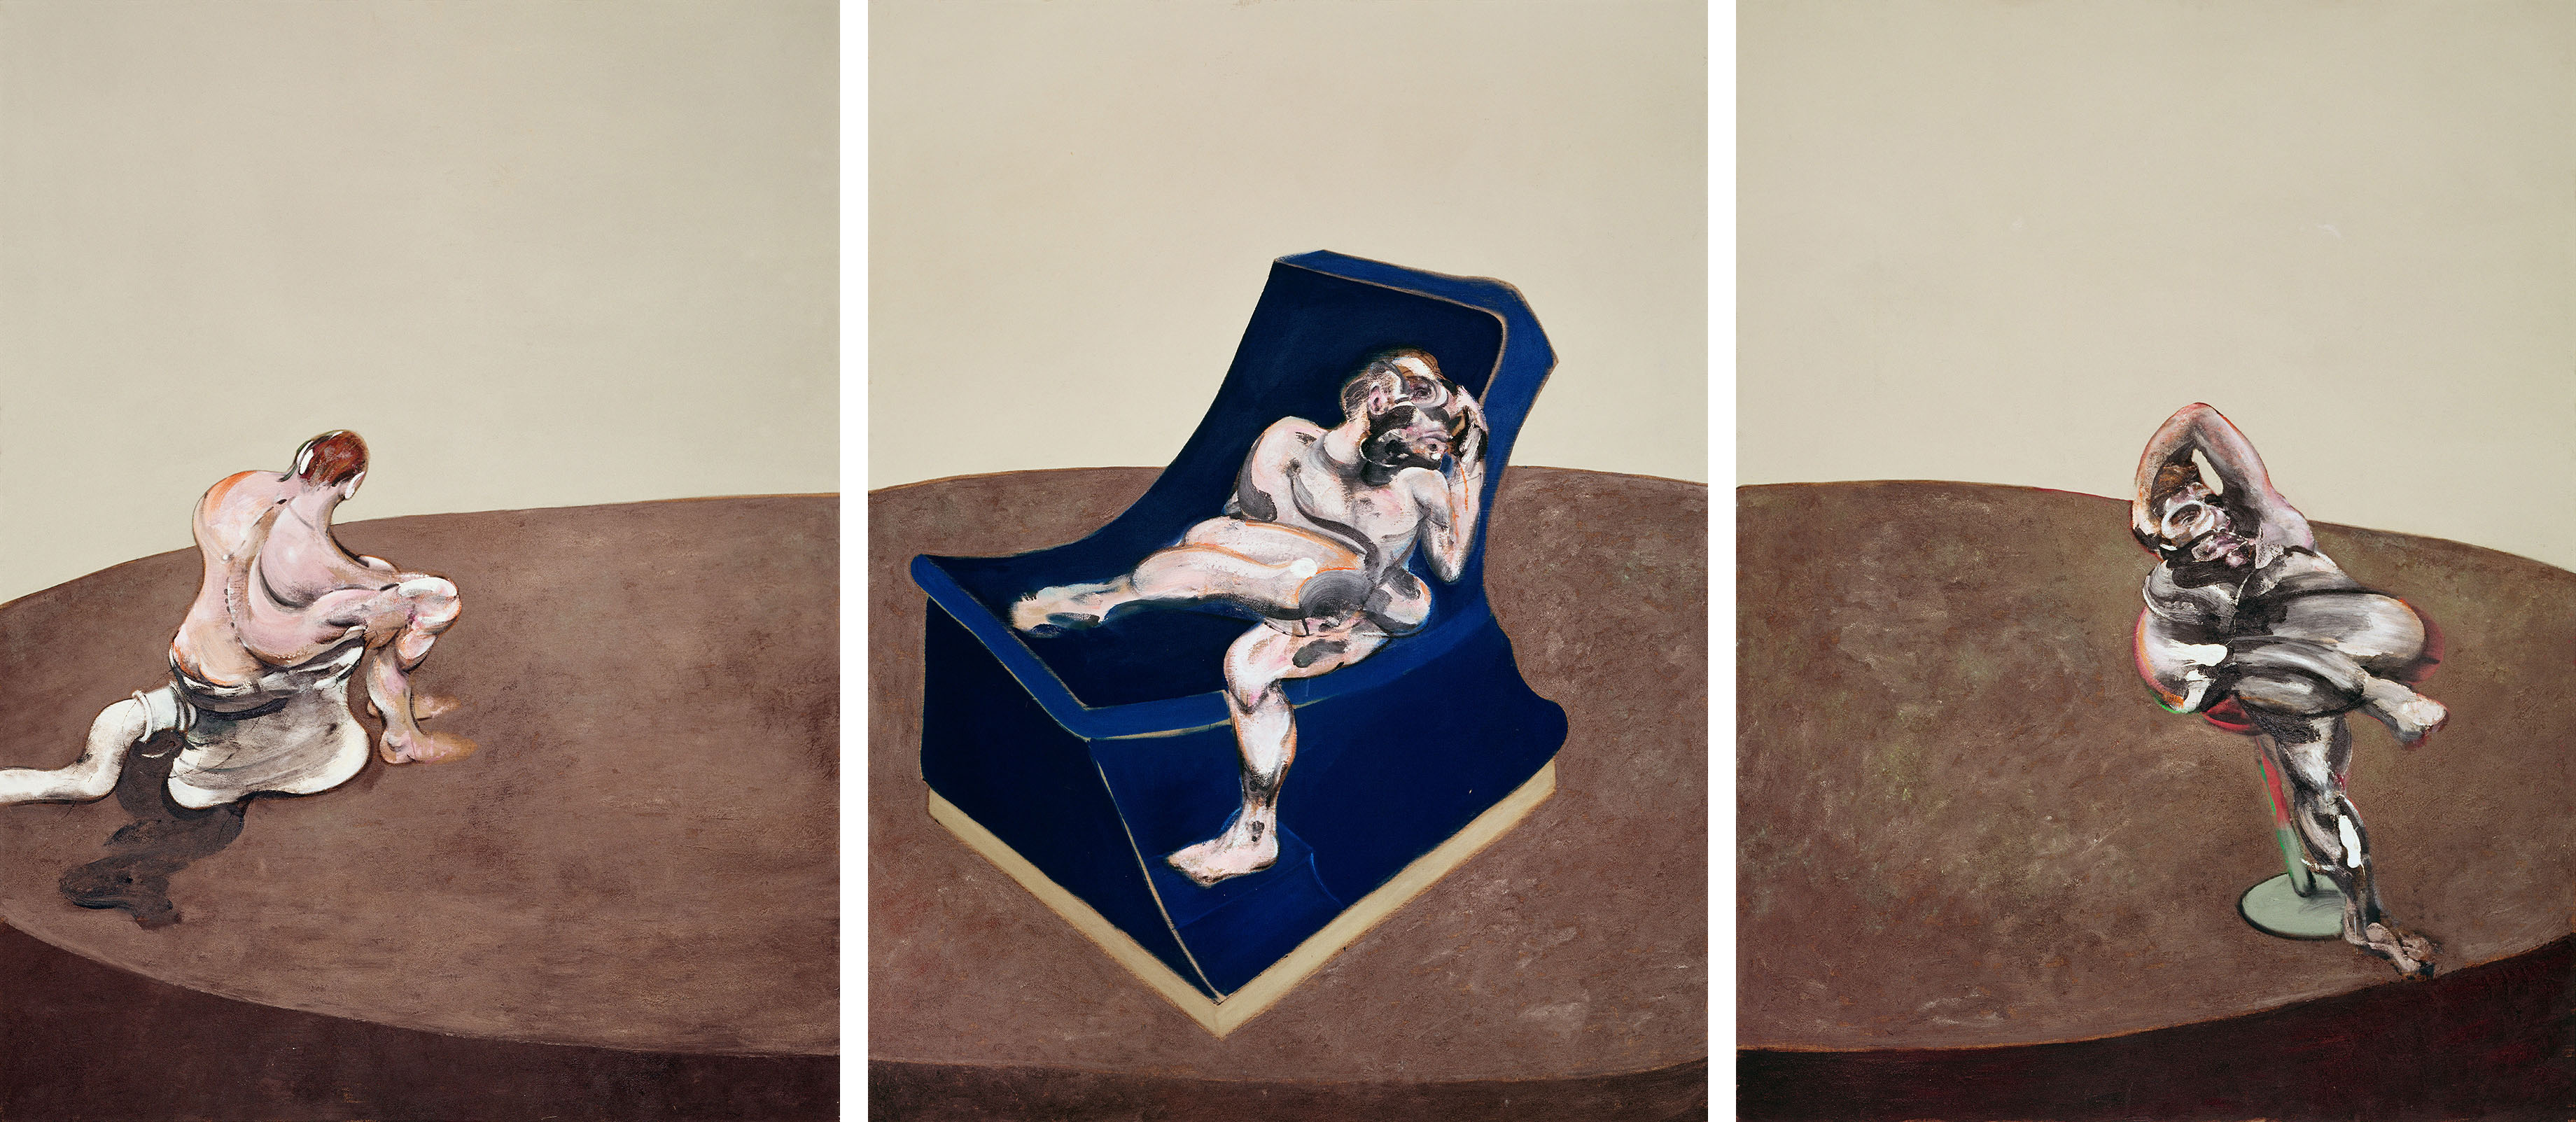 Three Figures in a Room, 1964. Oil on canvas. CR no. 64-10. © The Estate of Francis Bacon / DACS London 2022. All rights reserved.